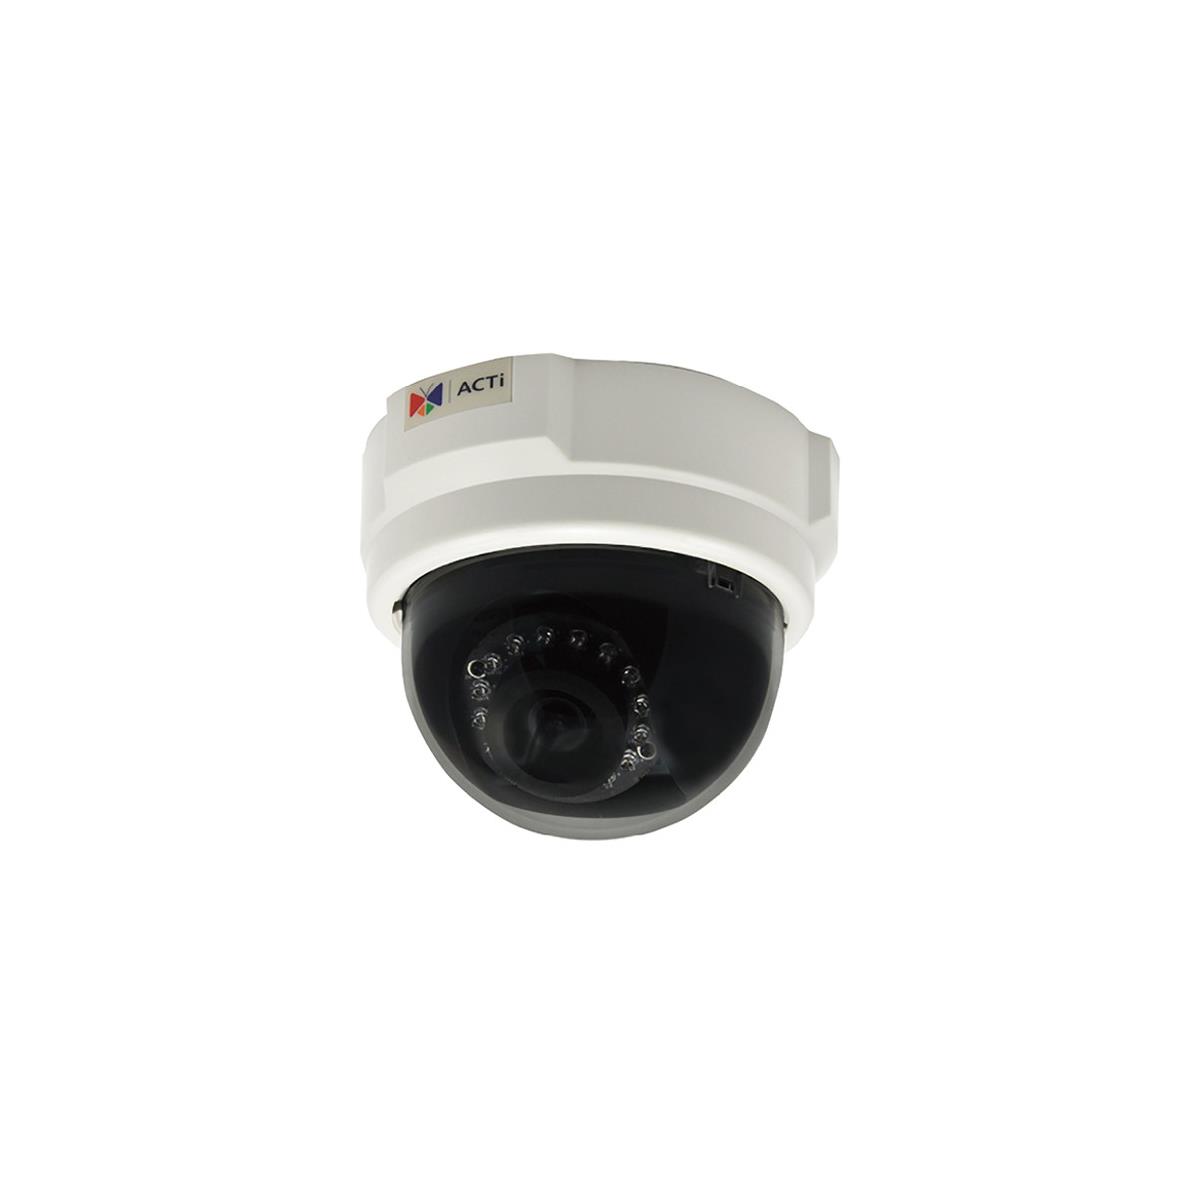 Image of ACTi D54 Day/Night Indoor IP Dome Camera